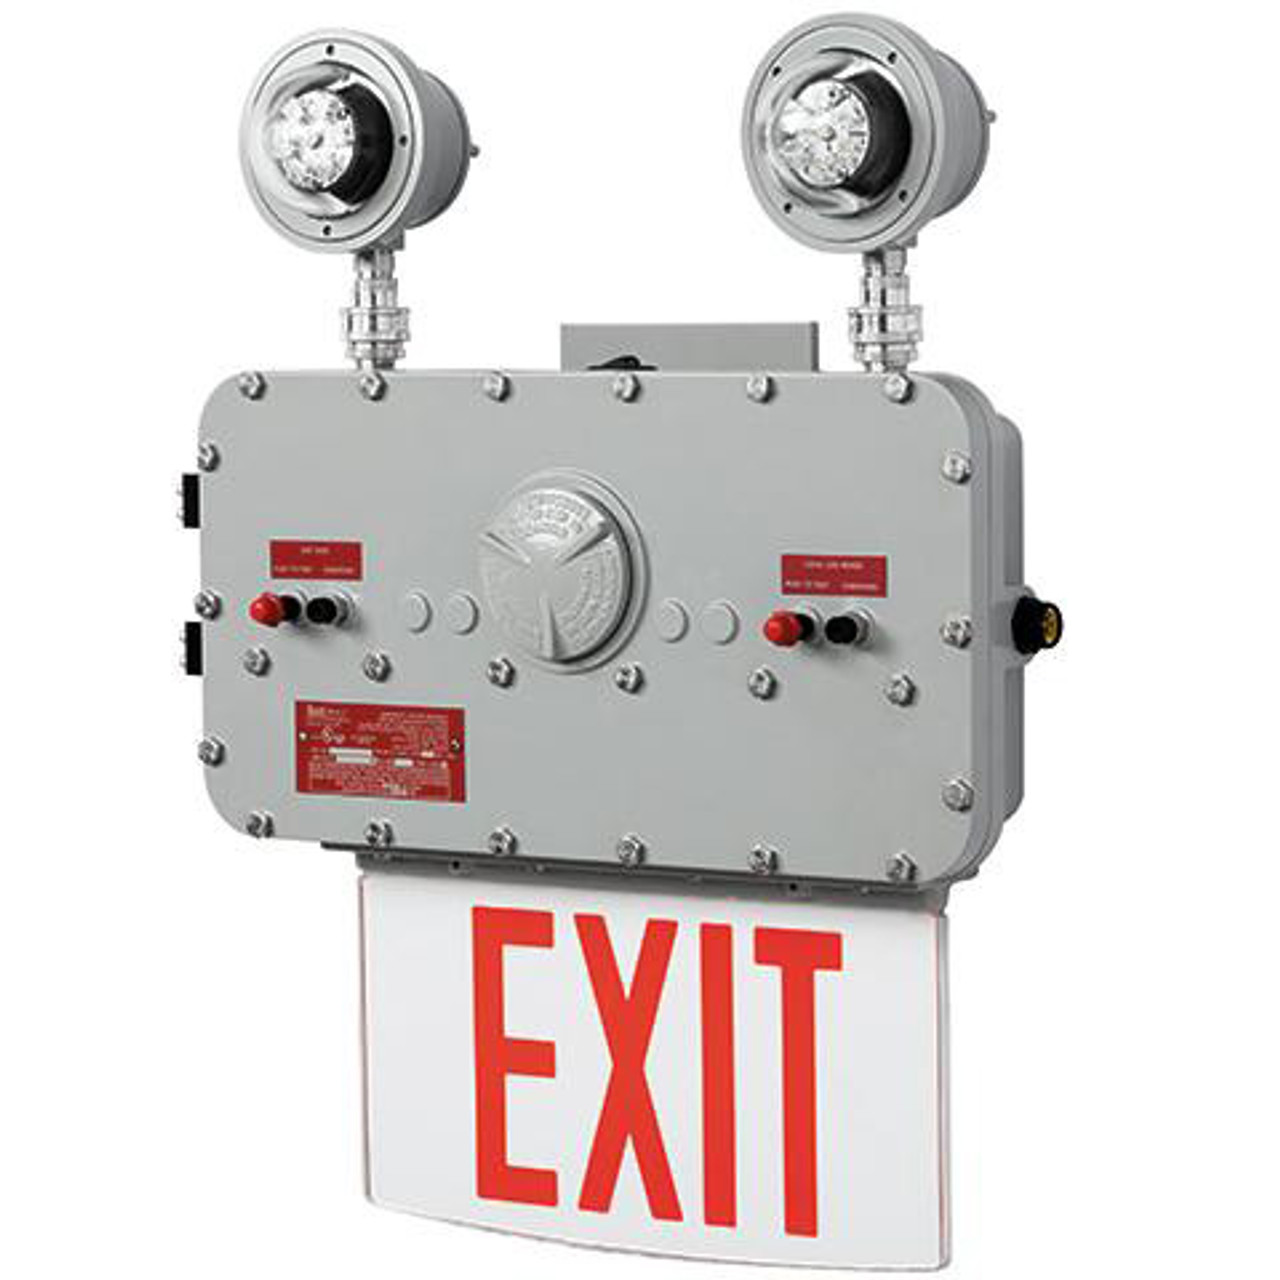 Emergency Exit Lights - A P Fire Protection